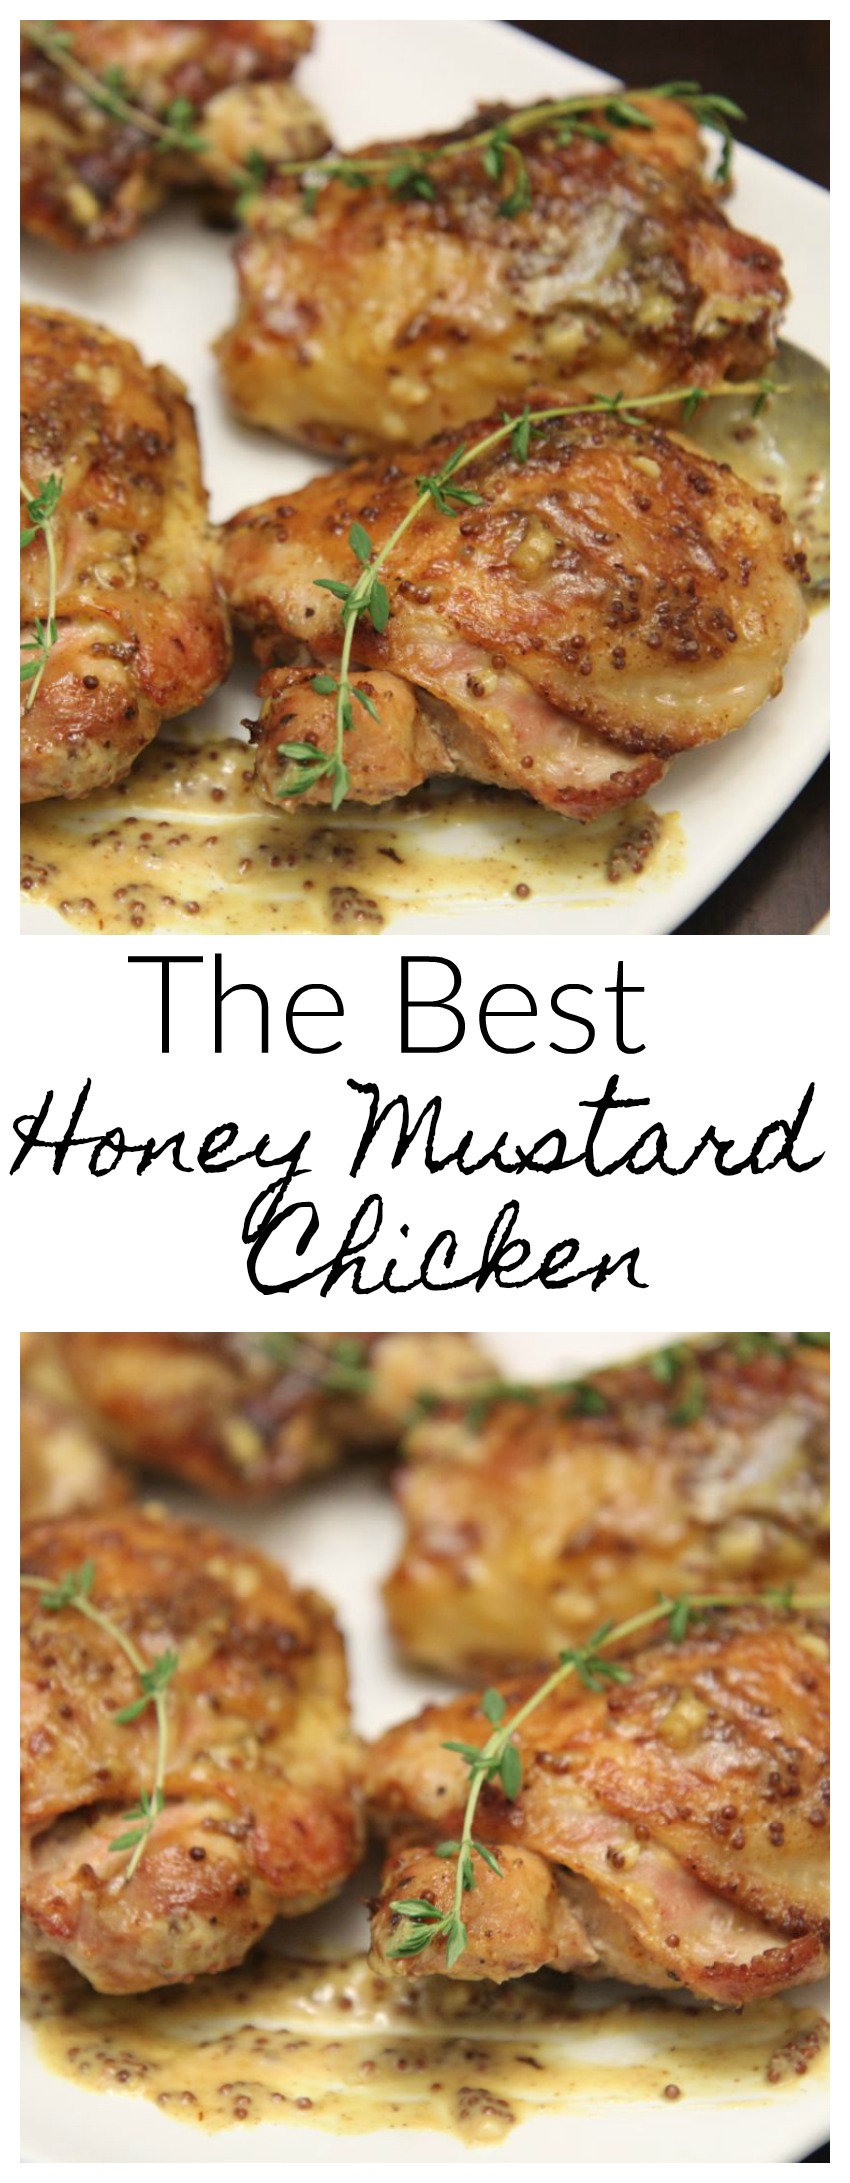 The Best Honey Mustard Chicken Recipe by Cooked By Julie